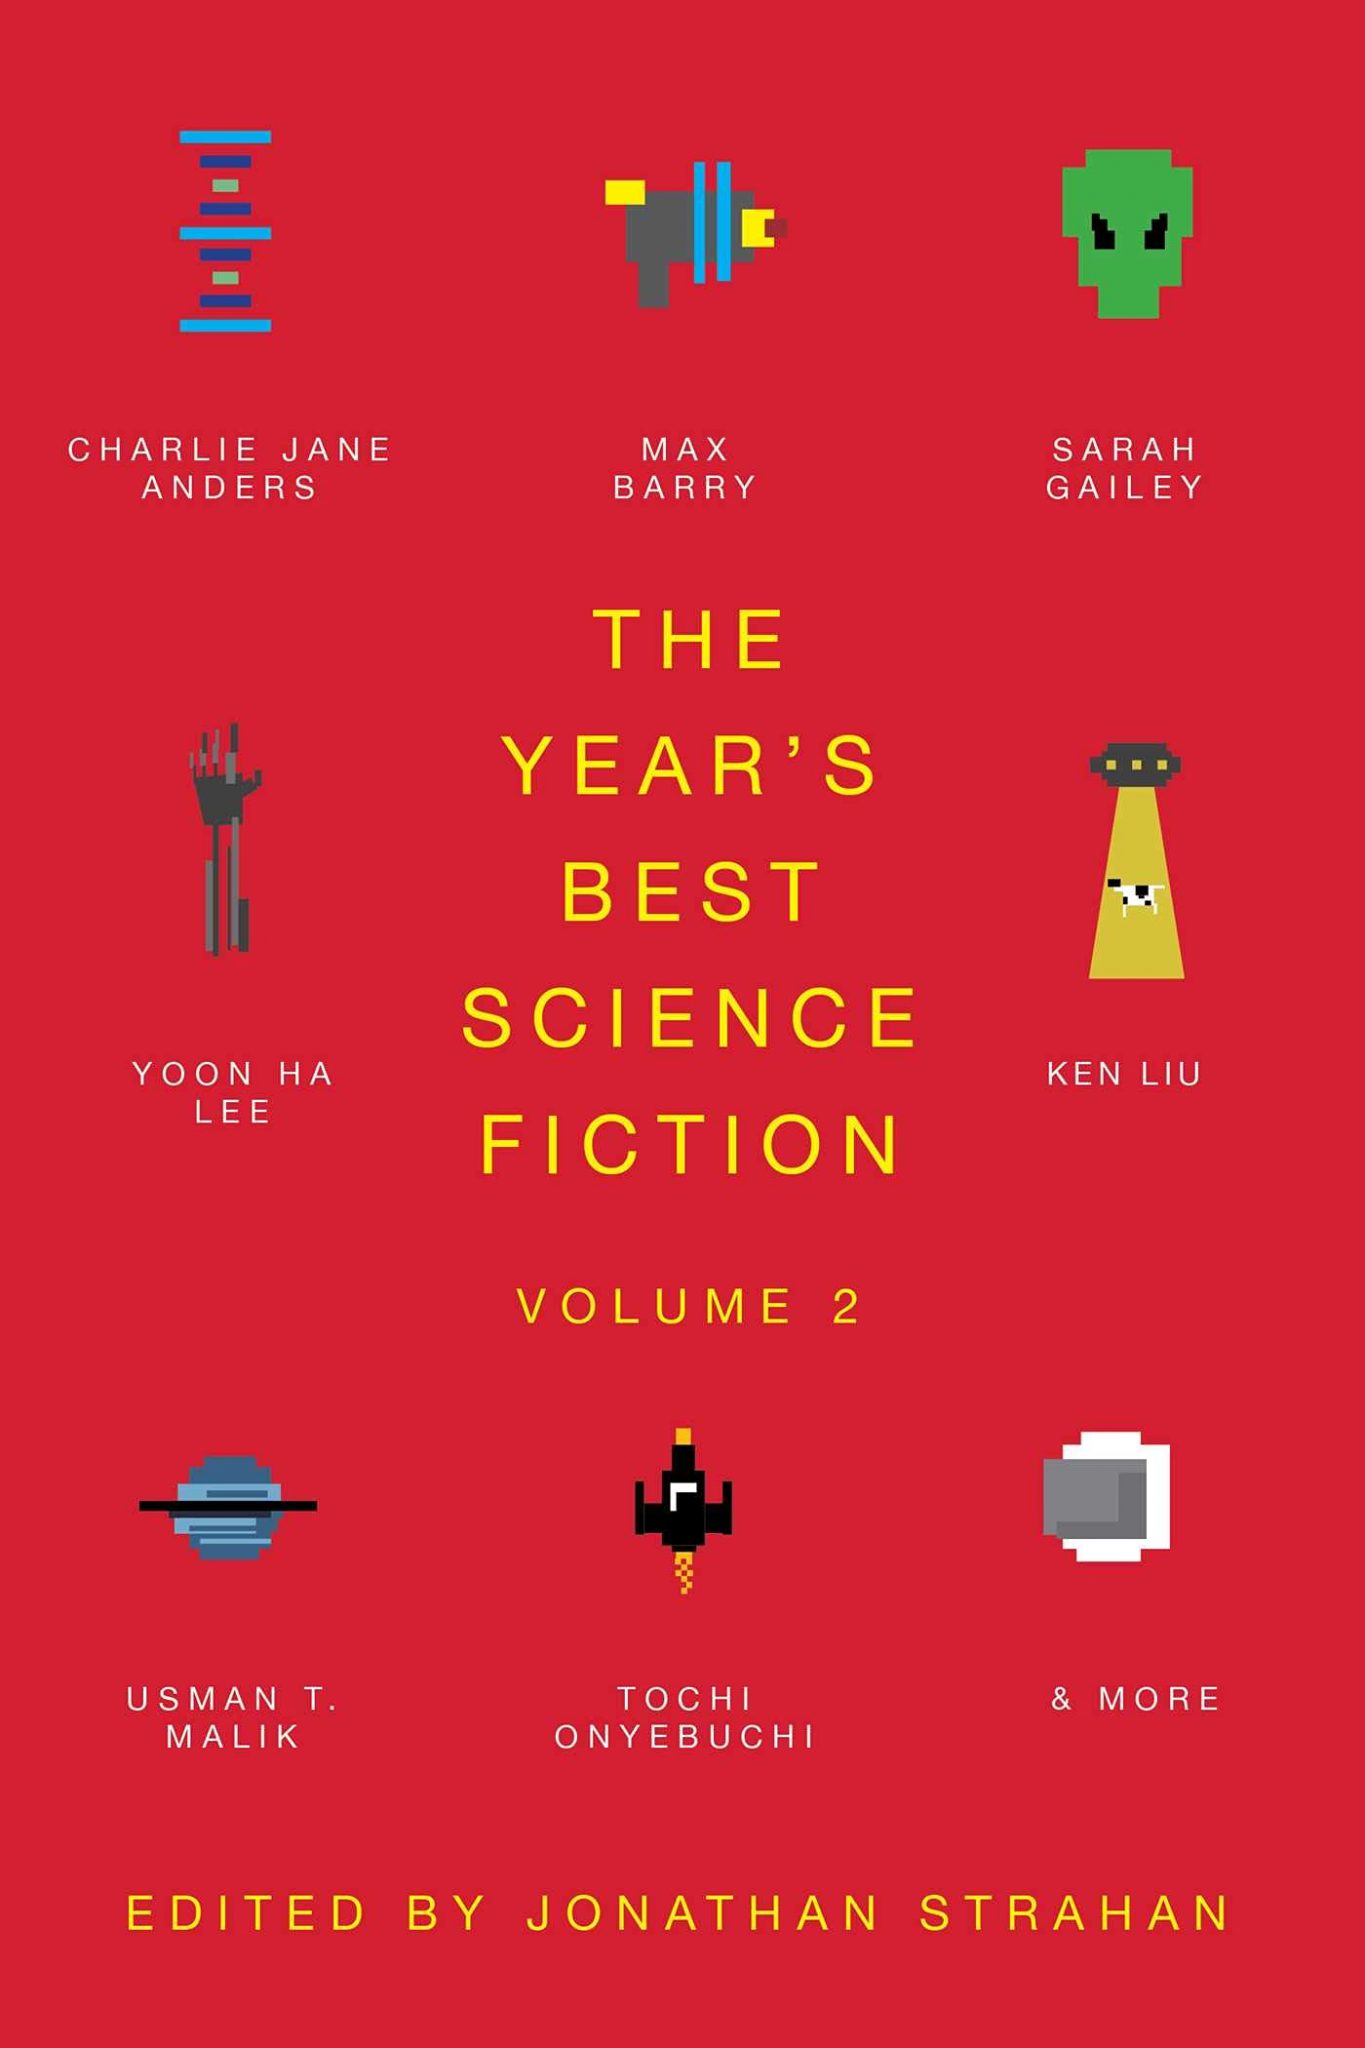 New Treasures The Year’s Best Science Fiction Volume 2 edited by